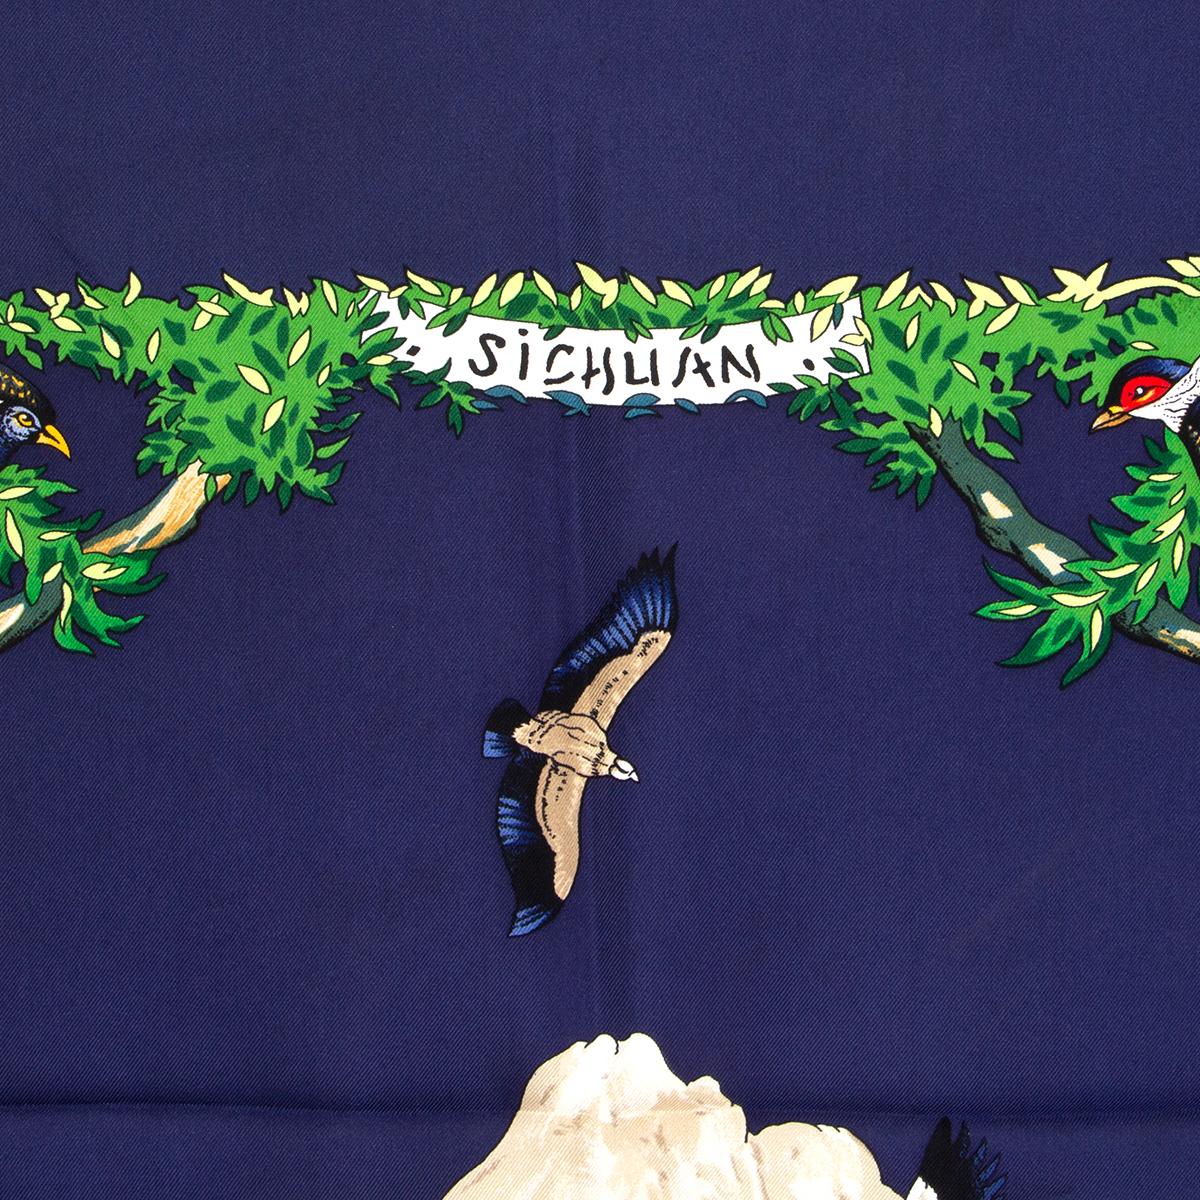 Hermes 'Sichuan 90' scarf by Robert Dallet in dark blue silk twill (100%) with multicolor details. Has been worn and is in excellent condition.

Width 90cm (35.1in)
Height 90cm (35.1in)